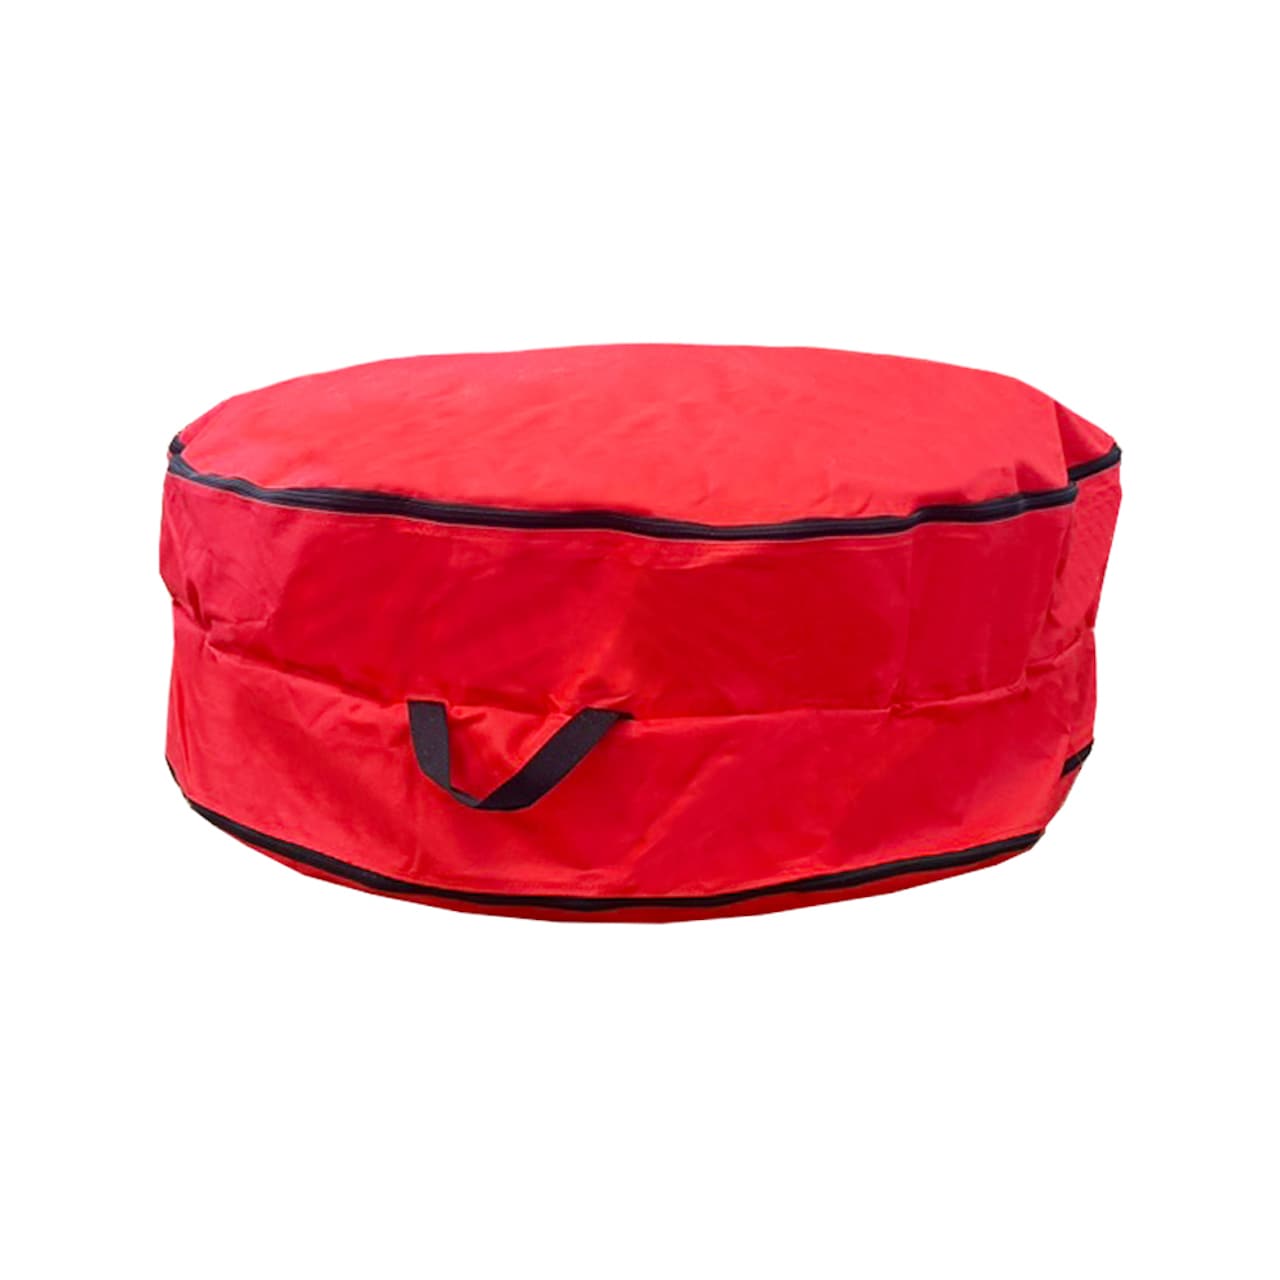 Deluxe Christmas Wreath Storage Bag Rebrilliant Color: Red, Size: 10 H x 48 W x 48 D